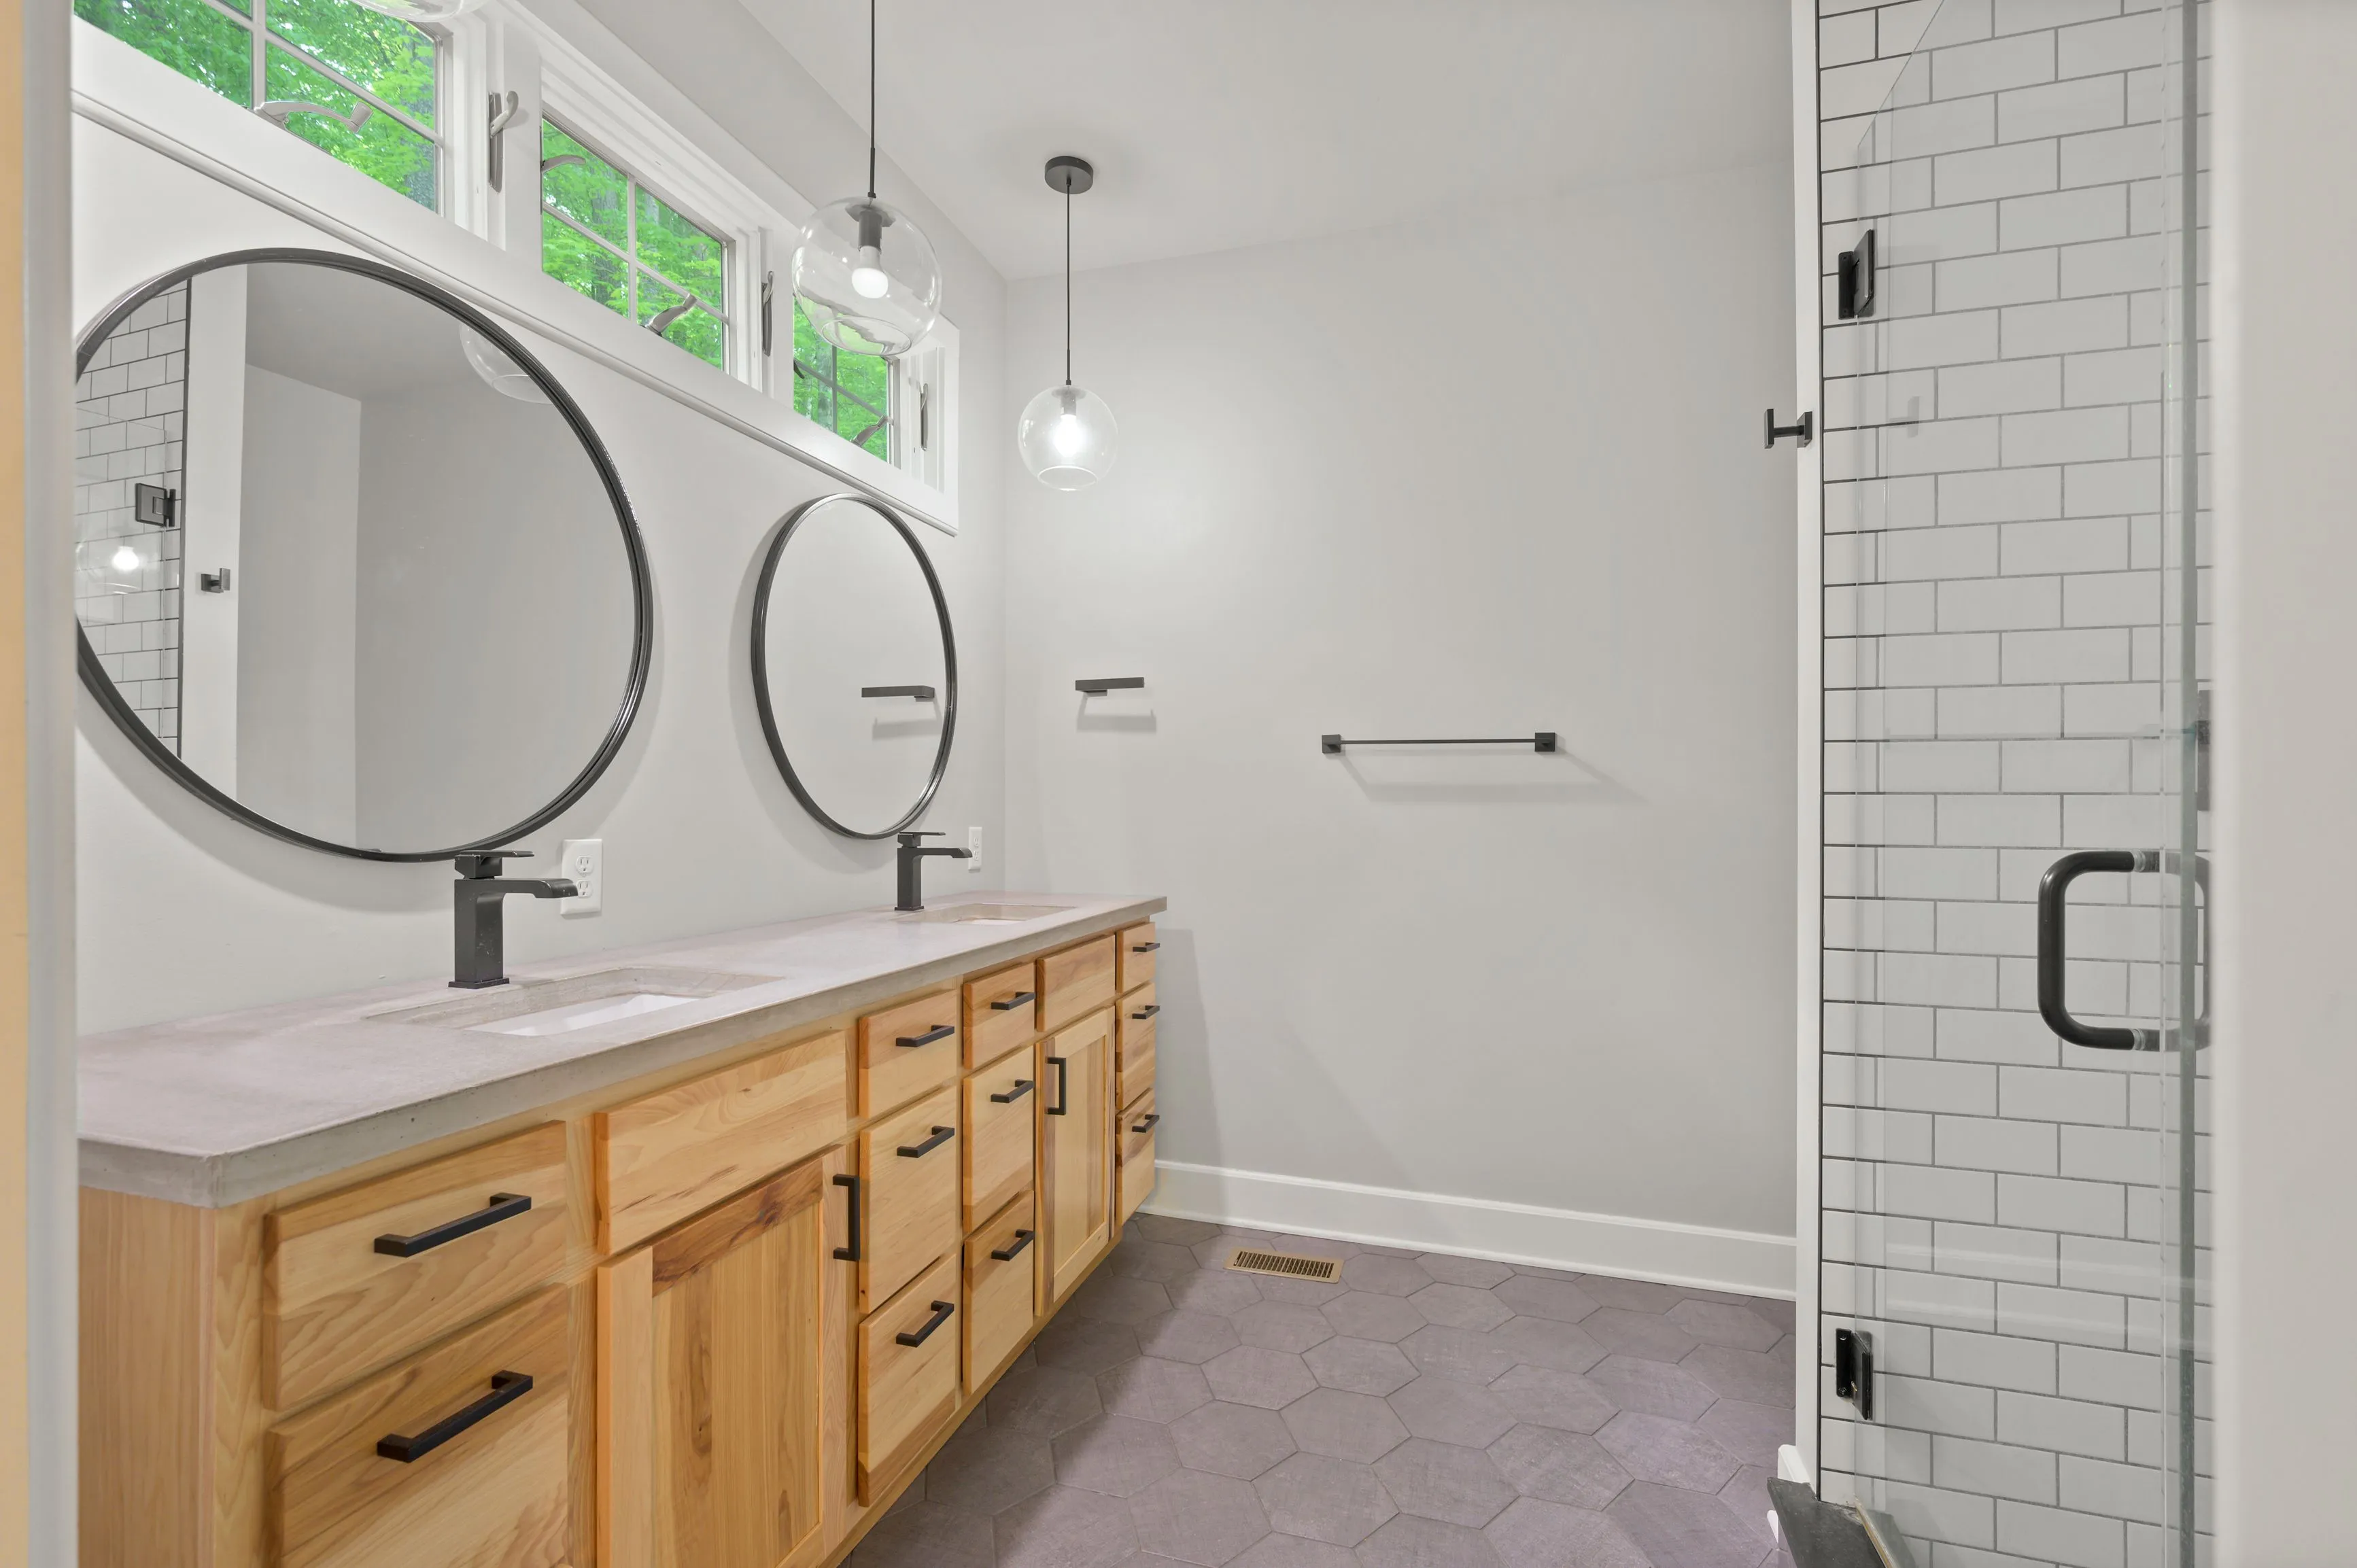 Modern bathroom interior with wooden vanity cabinet, double round mirrors, glass shower and subway tiles.